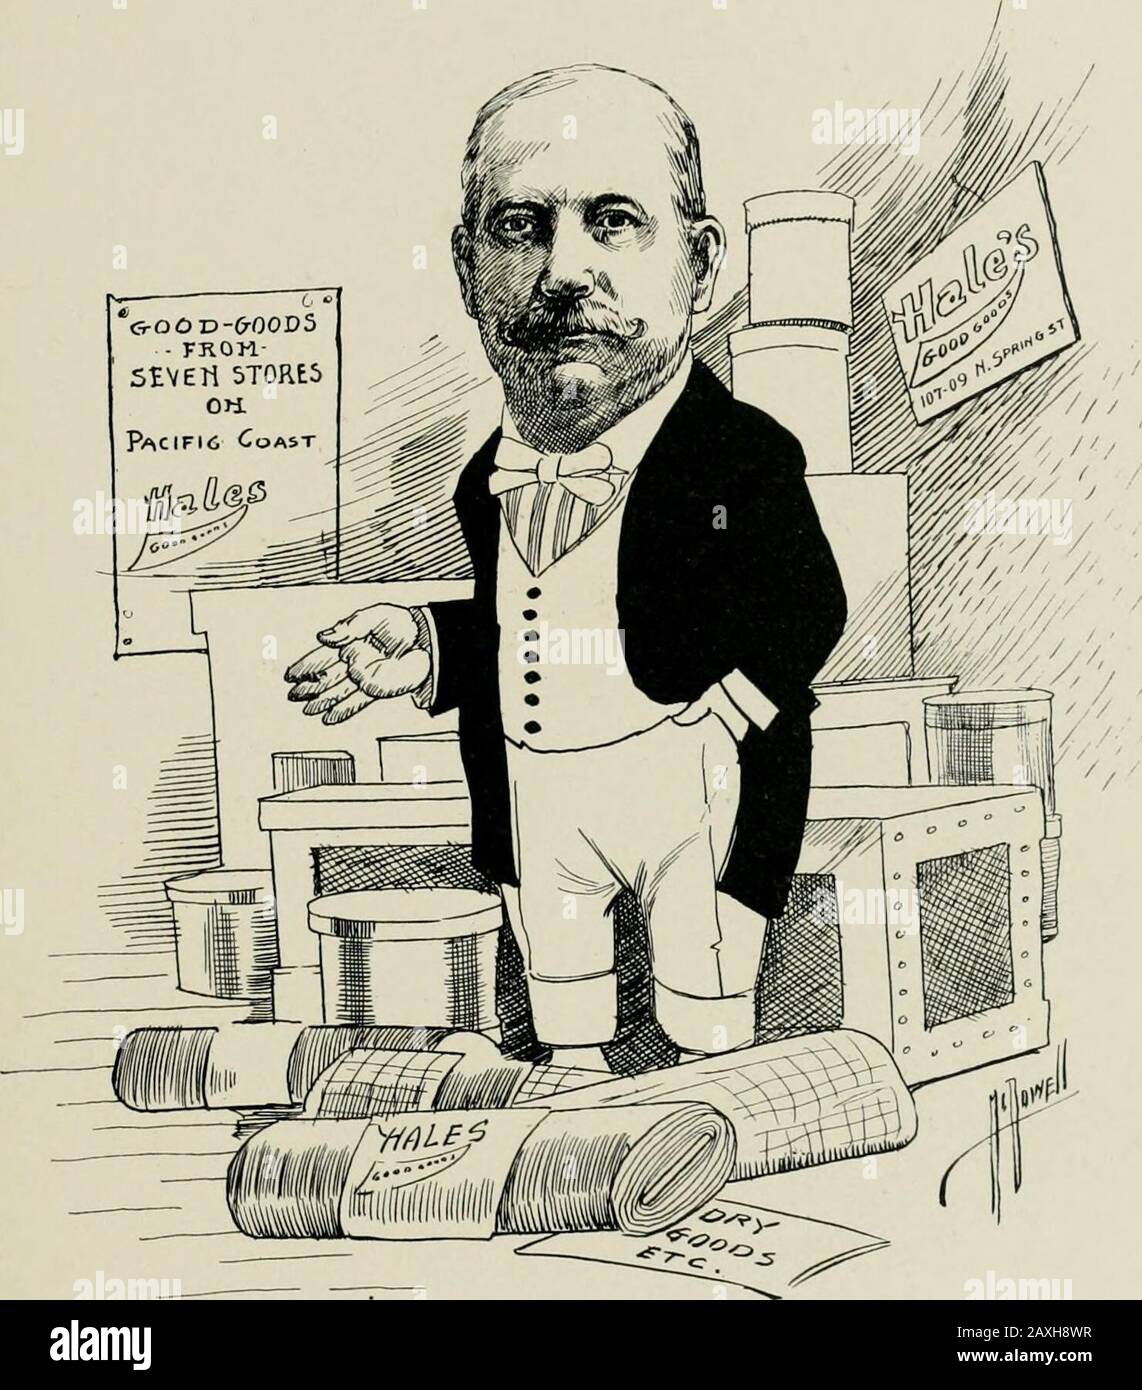 'As we see 'em,' a volume of cartoons and caricatures of Los Angeles citizens . M. A. HAMBURCF.R,President A. Hamburger & Sons. / / /. J. M. HALE,Dipartmeiit Store. Stock Photo